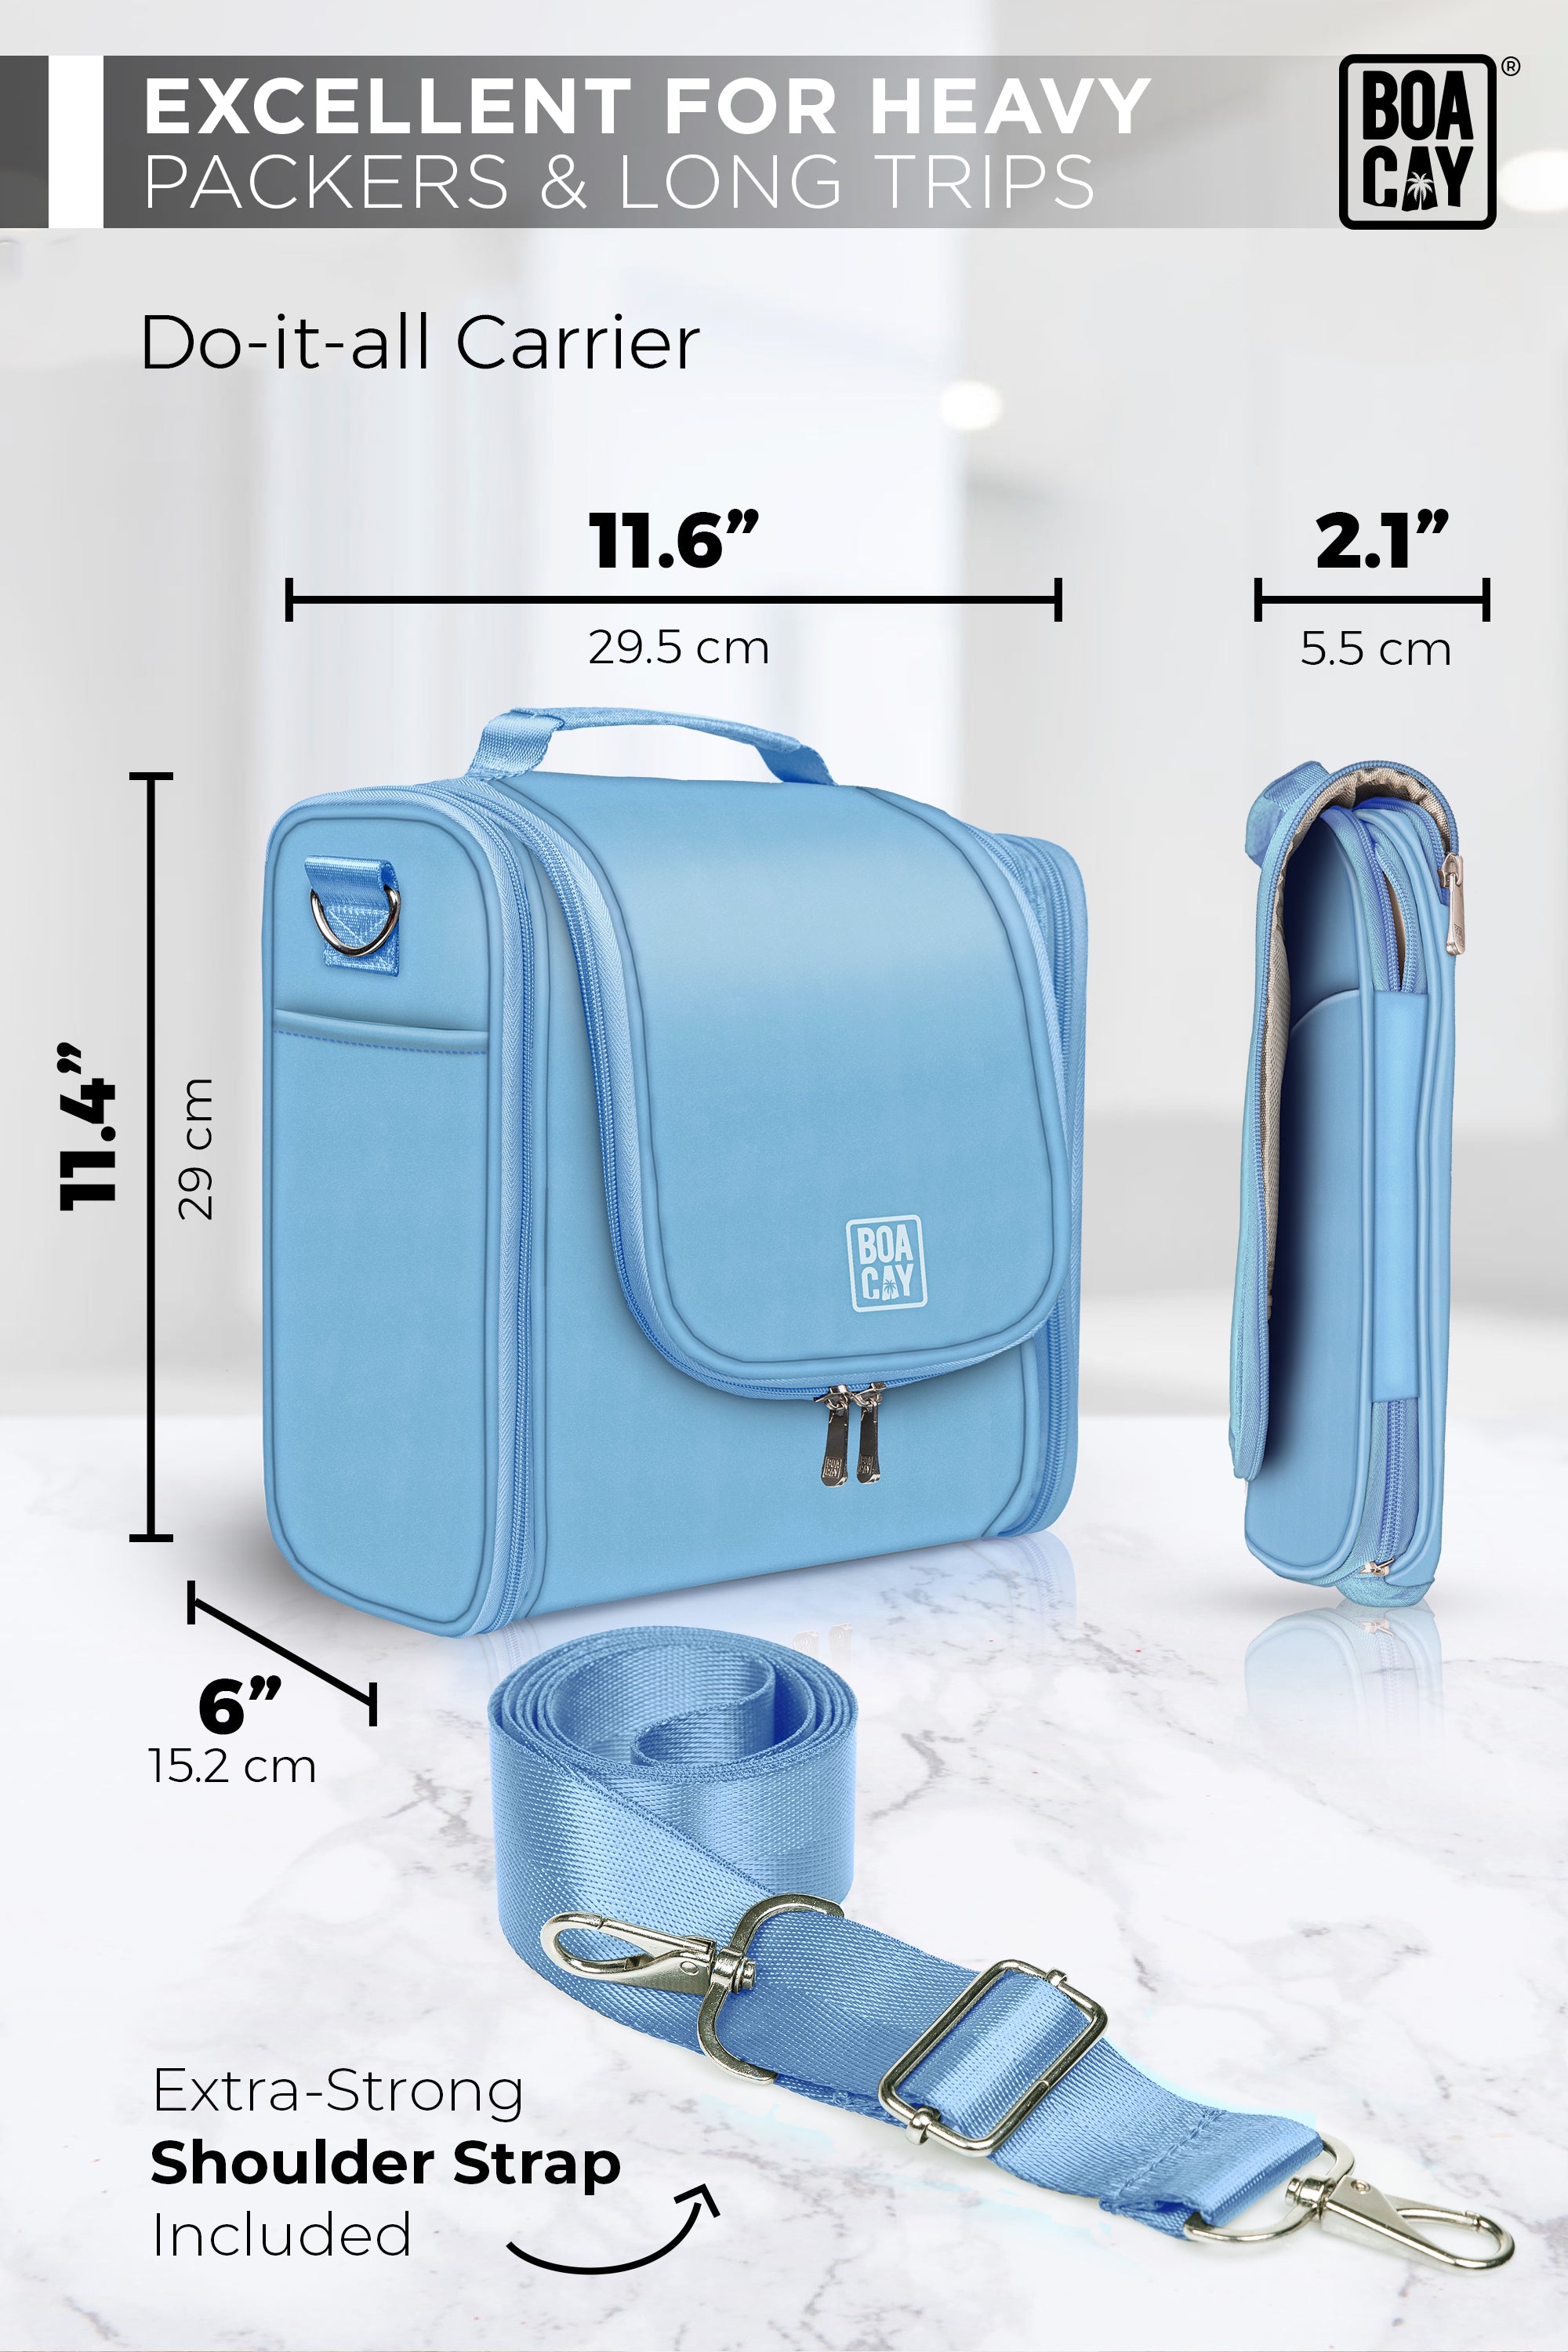 Men's Toiletry Bags, Travel Accessories